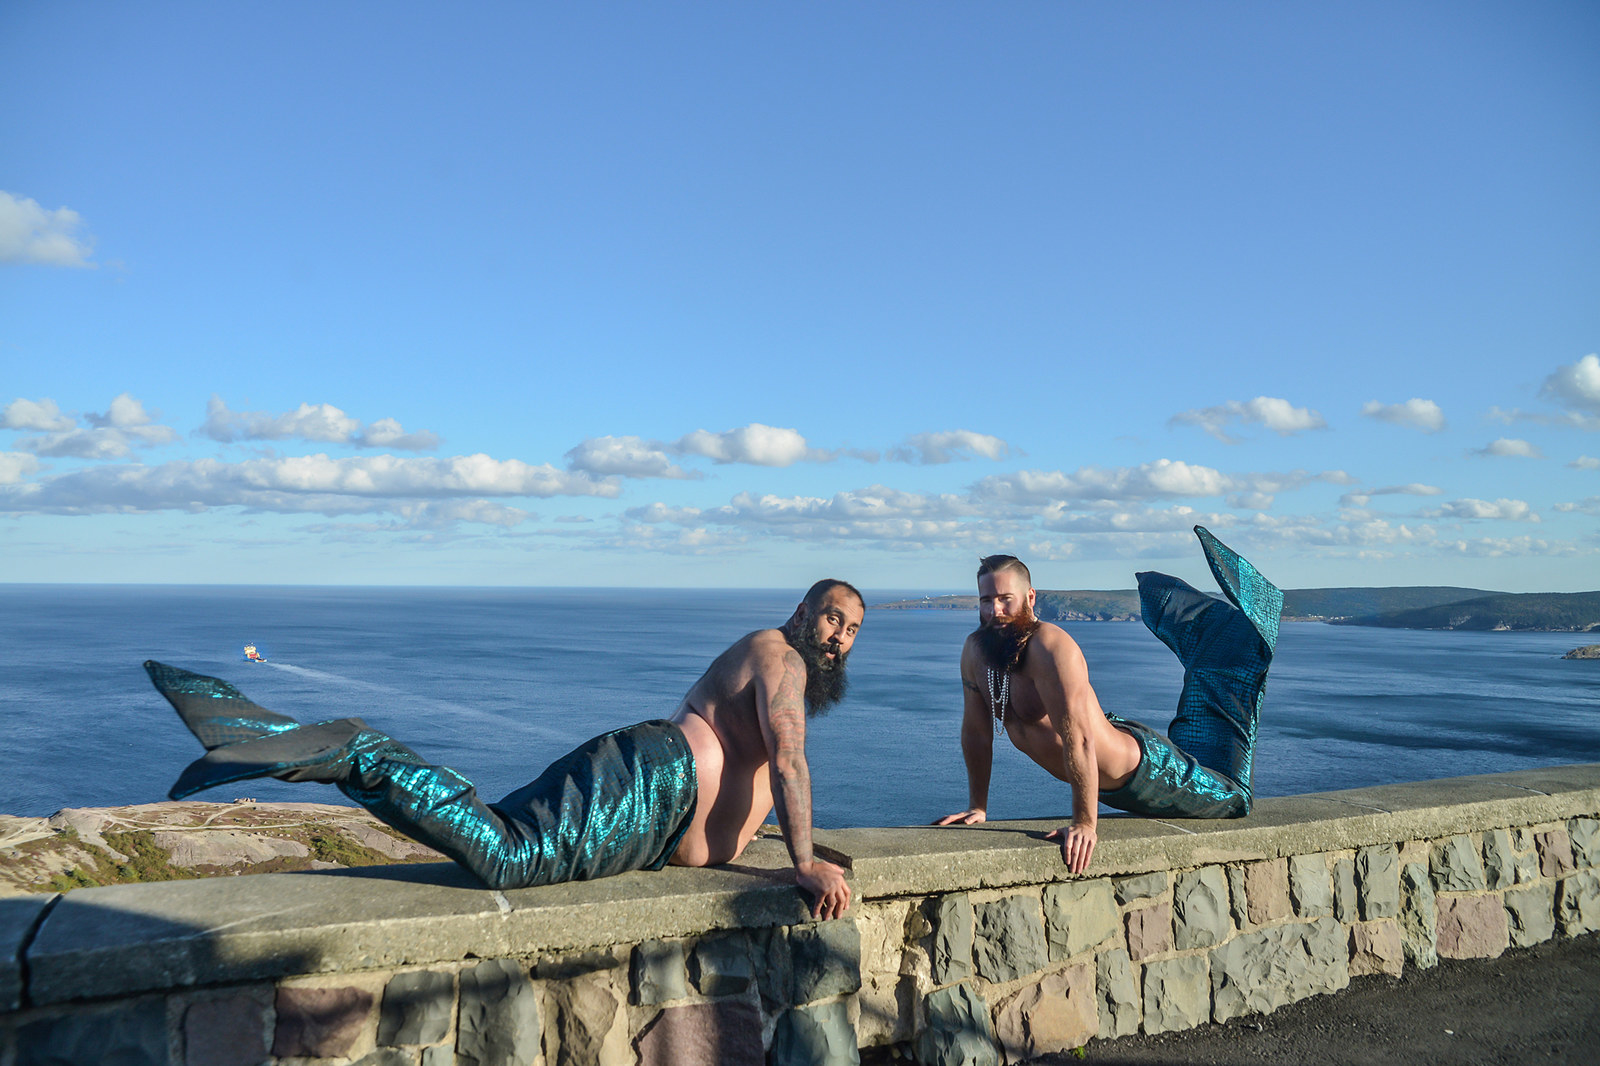 These Bearded Dudes Made A Sexy Mermaid Calendar And It's Glorious